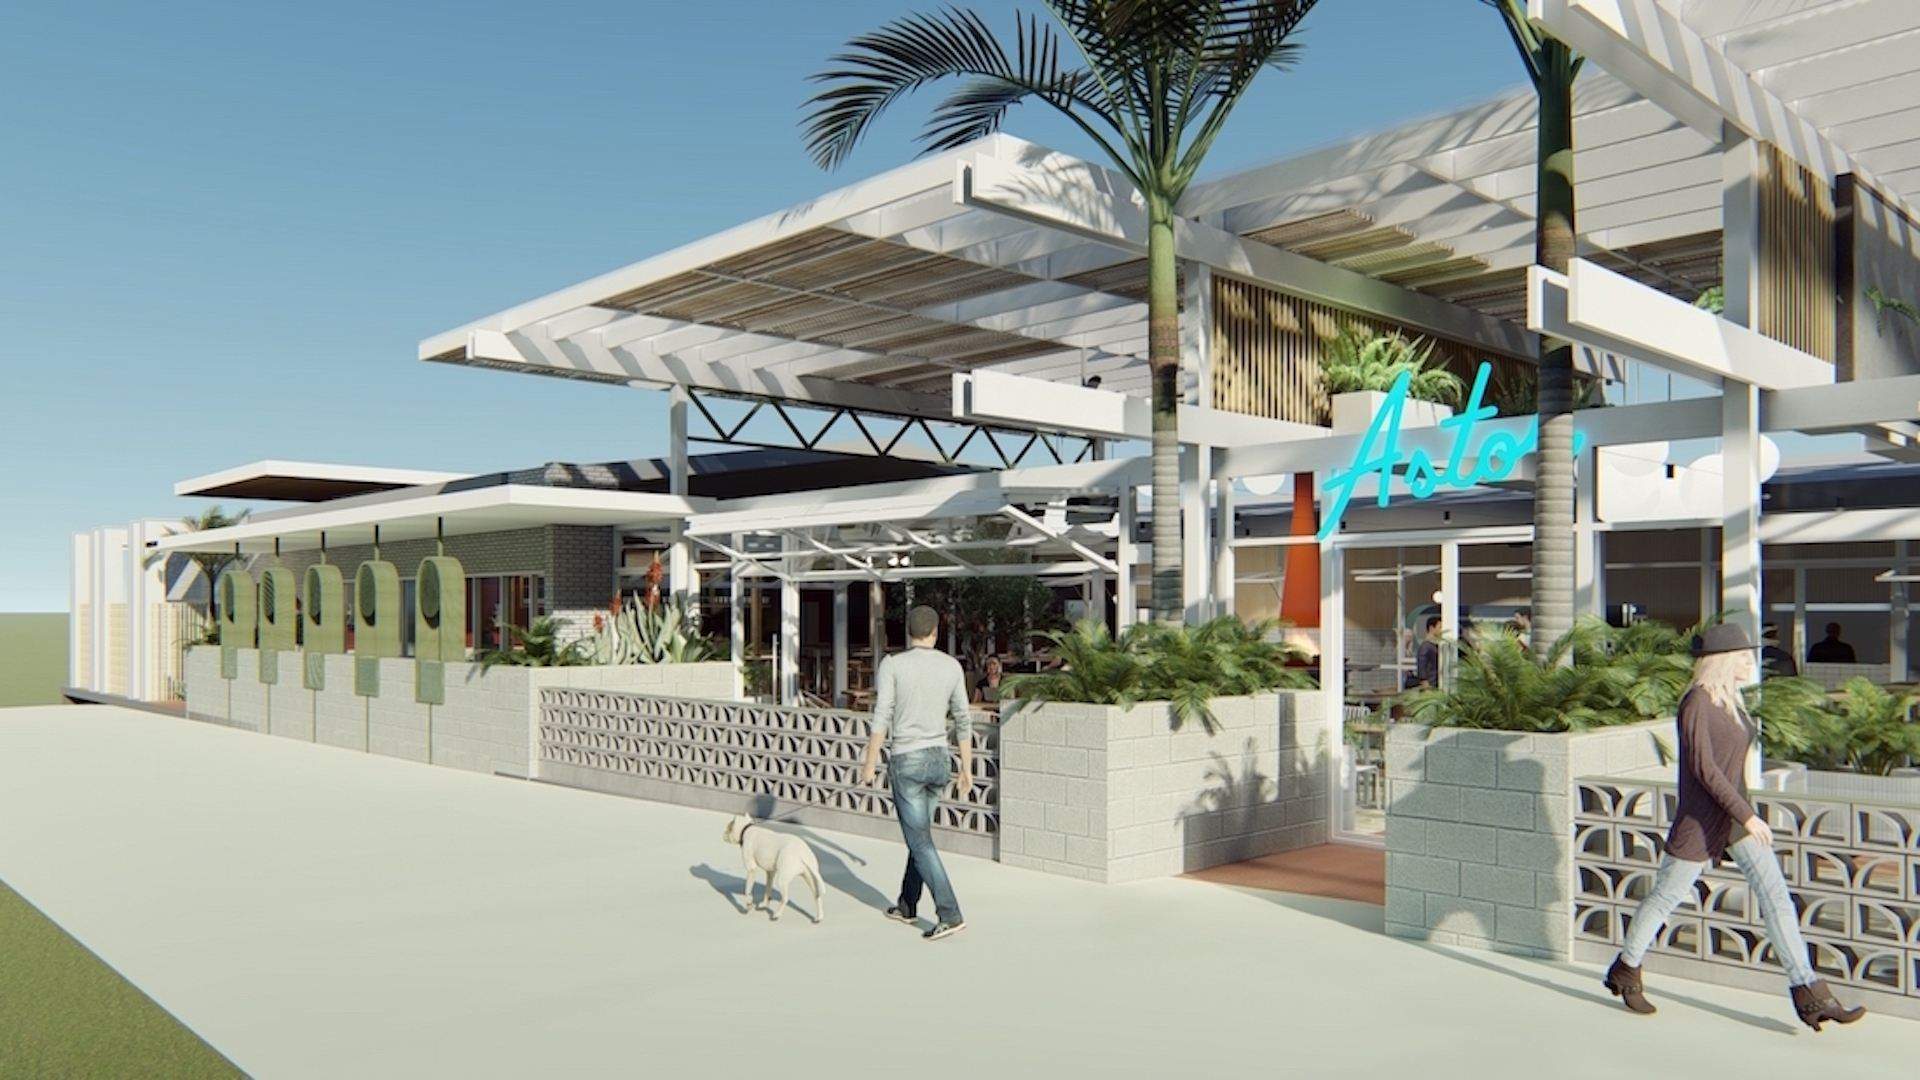 A Multimillion-Dollar Palm Springs-Inspired Motel Is Opening in Albury This Year